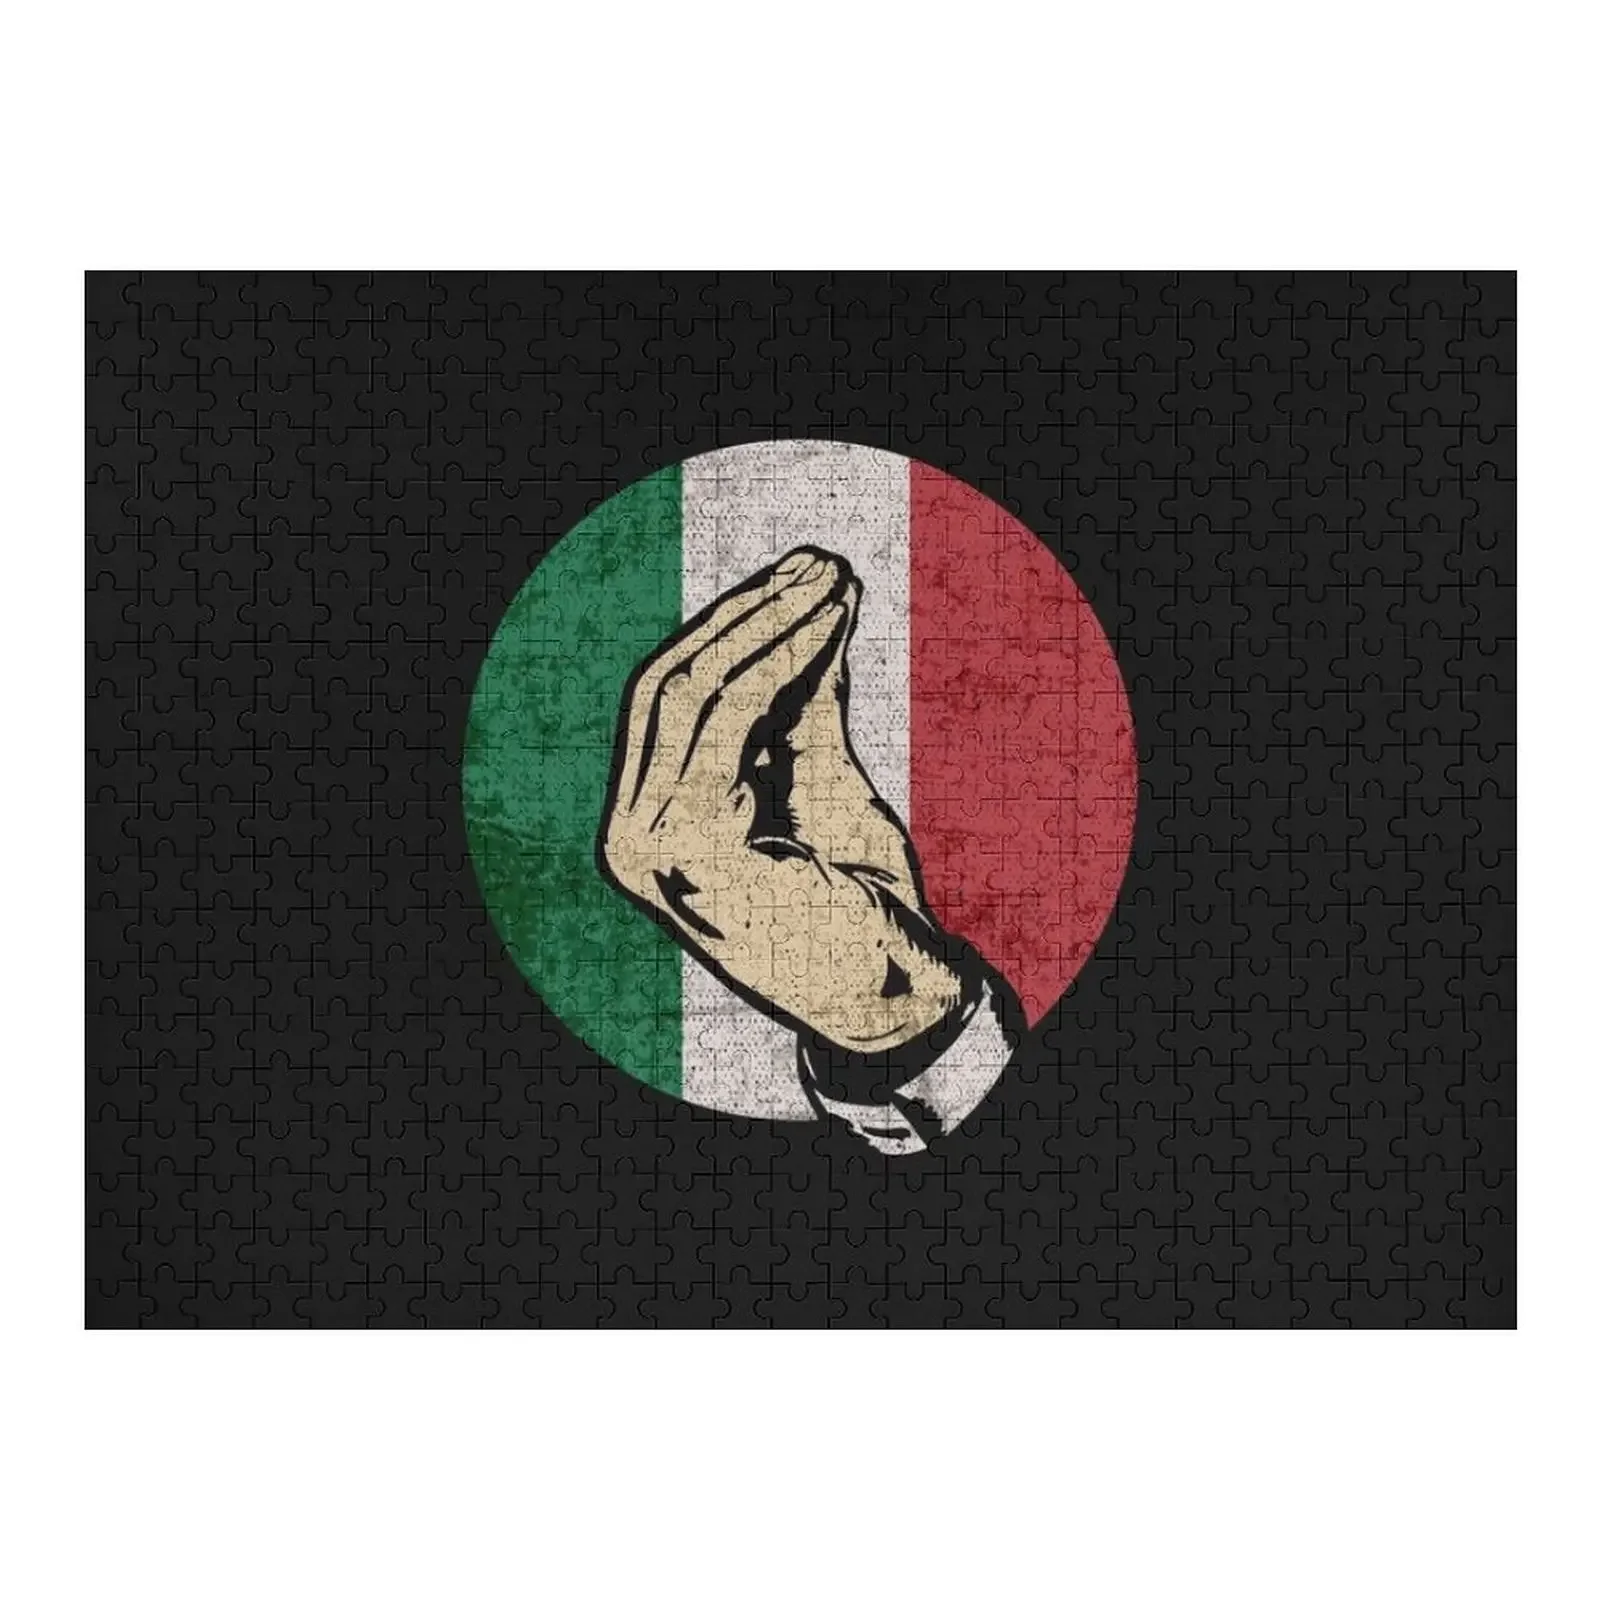 Italian Hand Gesture Sing Language Funny Italy Flag Vintage Jigsaw Puzzle Anime Puzzle 4pcs referee flag flags race conducting flags hand flags match referee flag